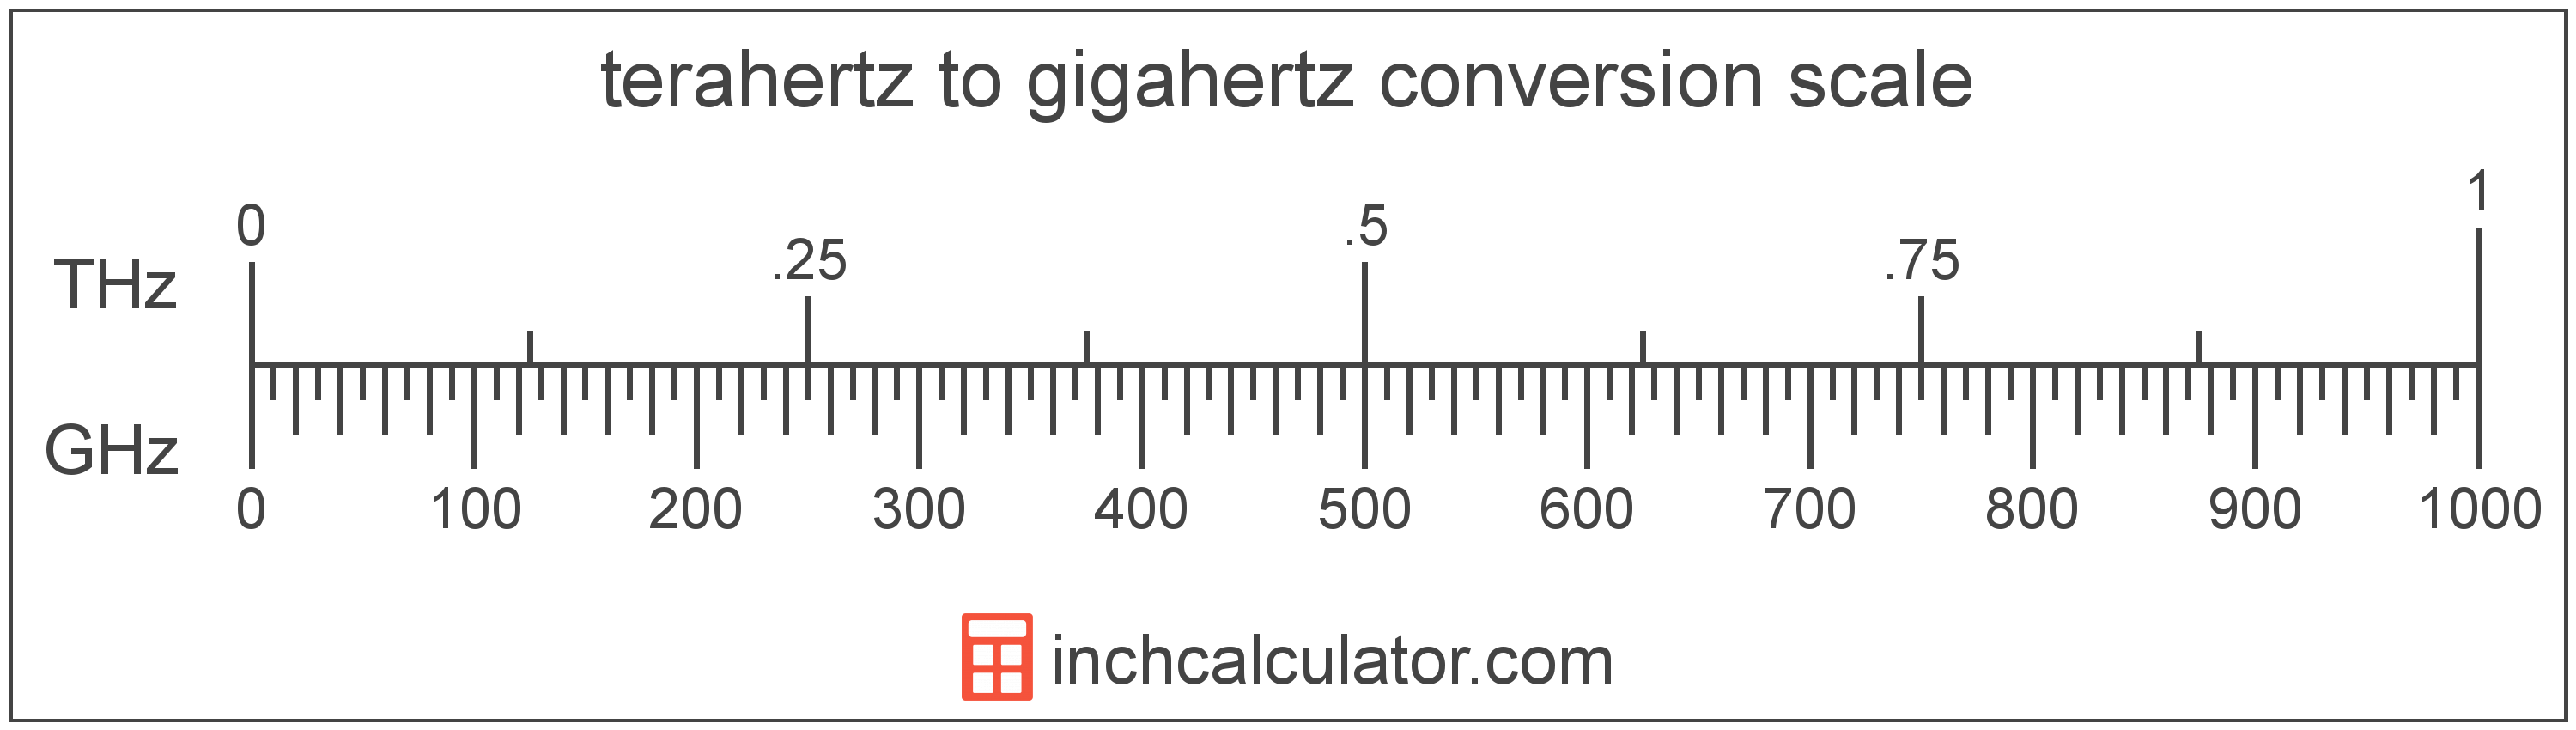 conversion scale showing terahertz and equivalent gigahertz frequency values